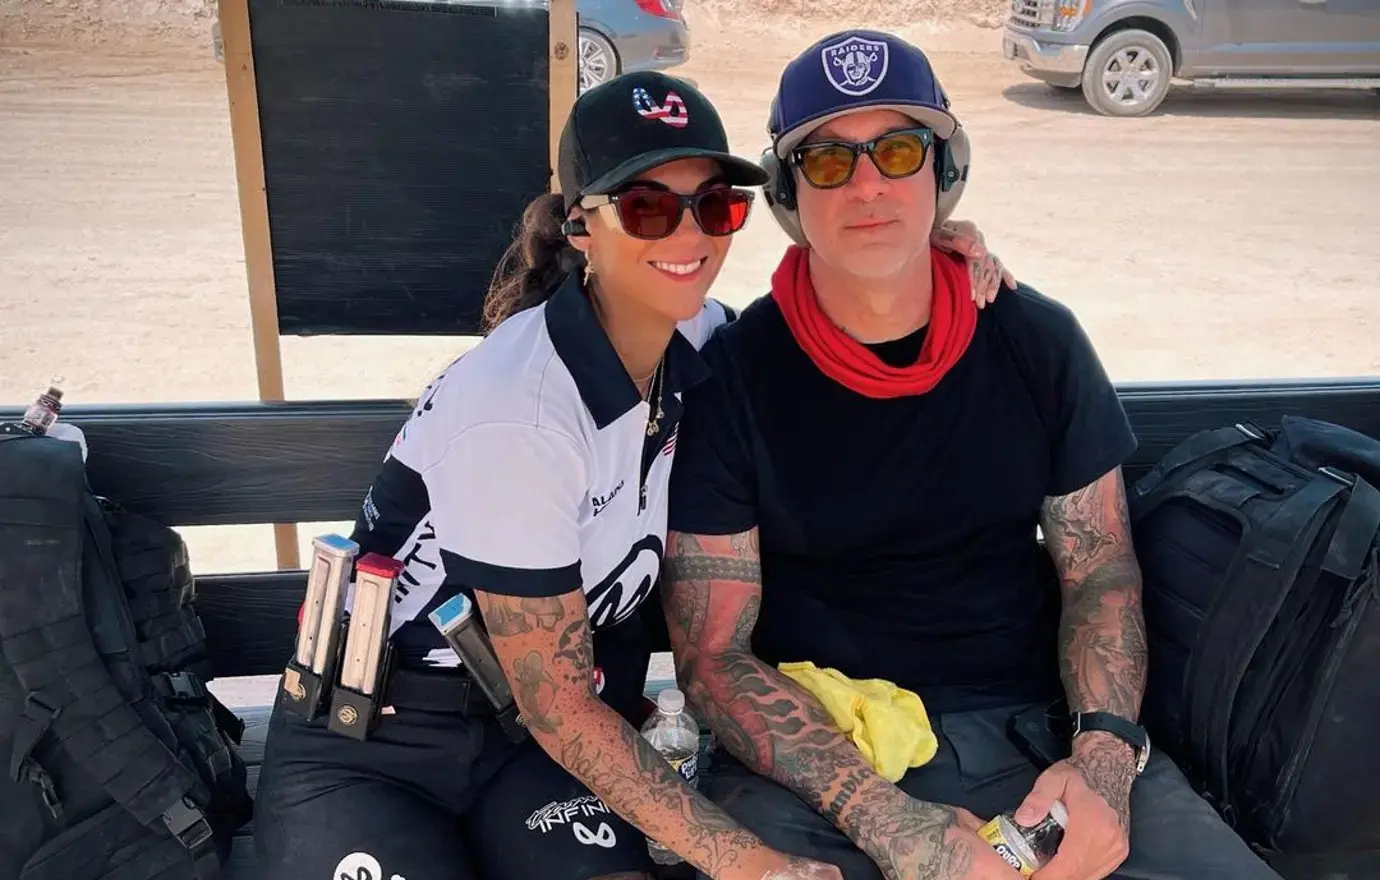 Jesse James Pregnant Wife Bonnie Rotten Demanded Support In Court Days Before Dismissing Divorce